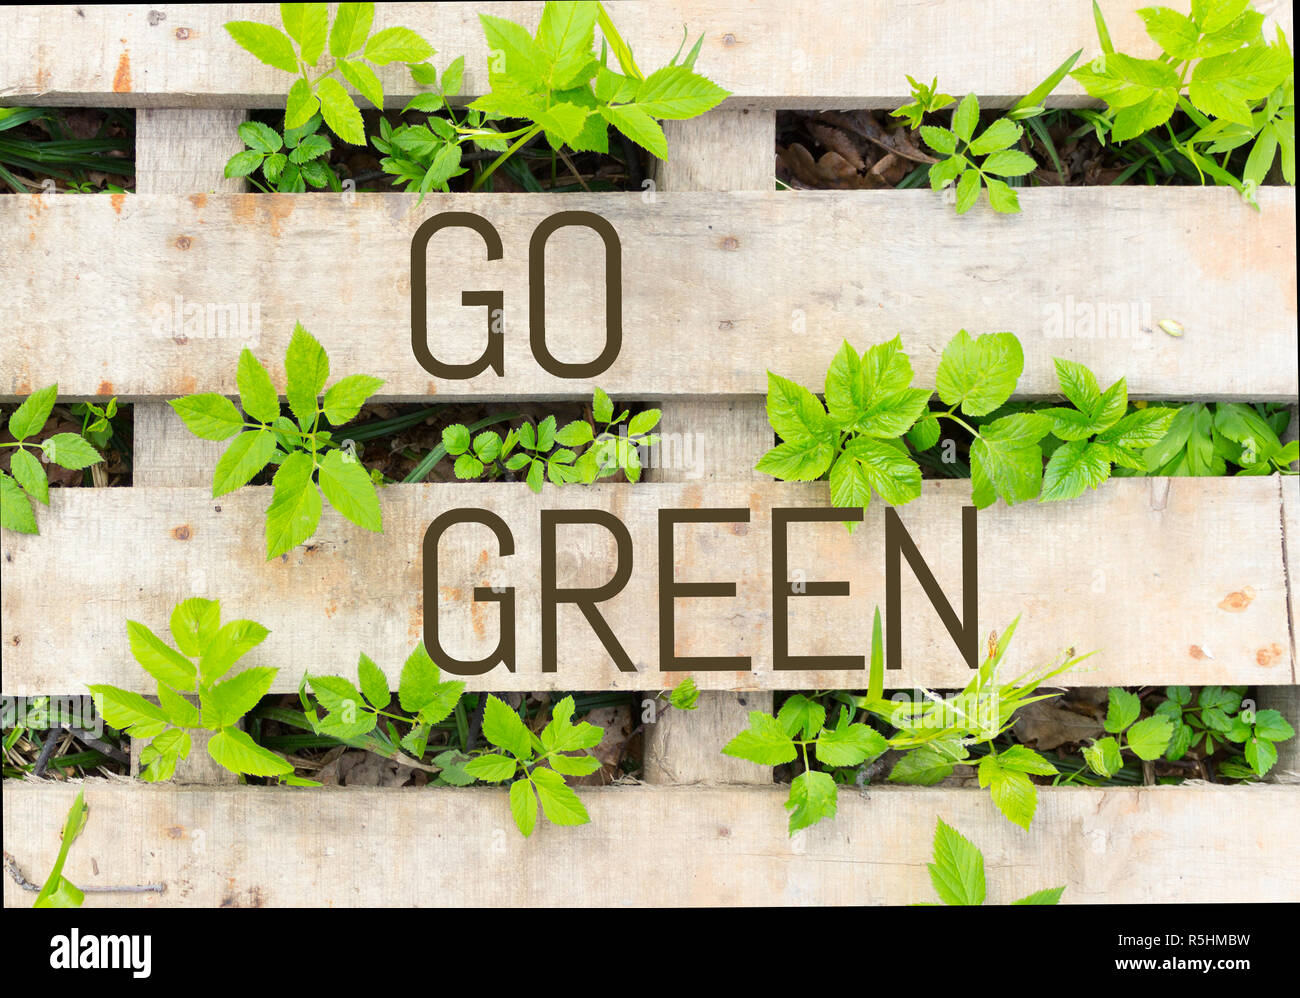 Go green concept image. green plants and wood Stock Photo